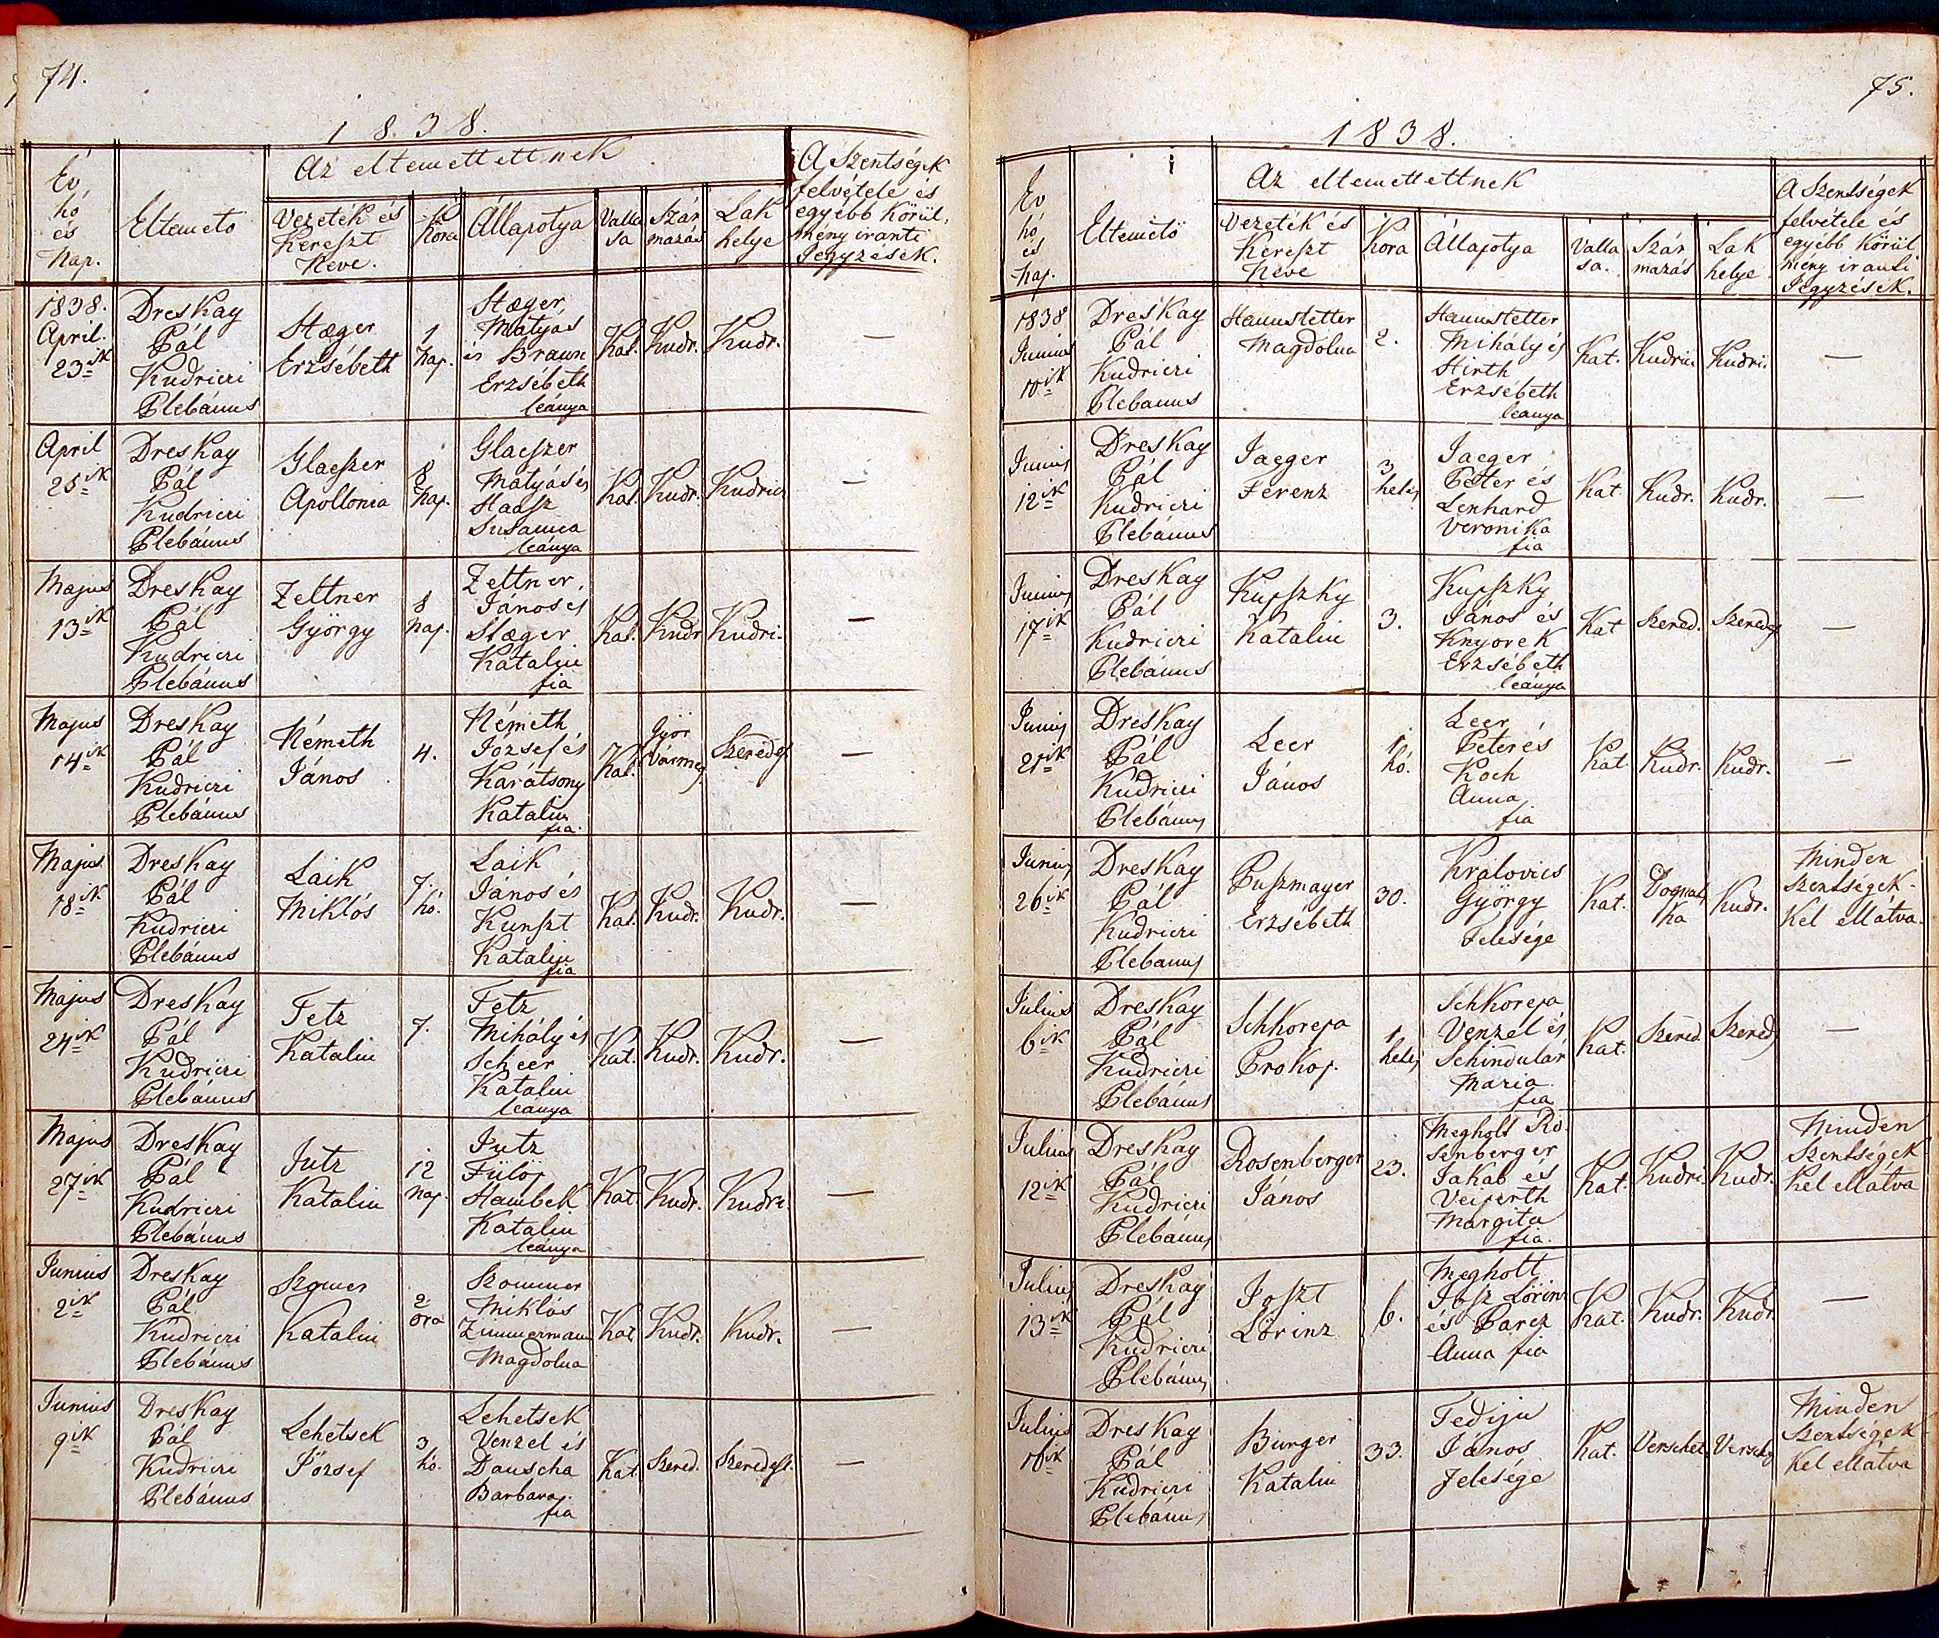 images/church_records/DEATHS/1829-1851D/074 i 075